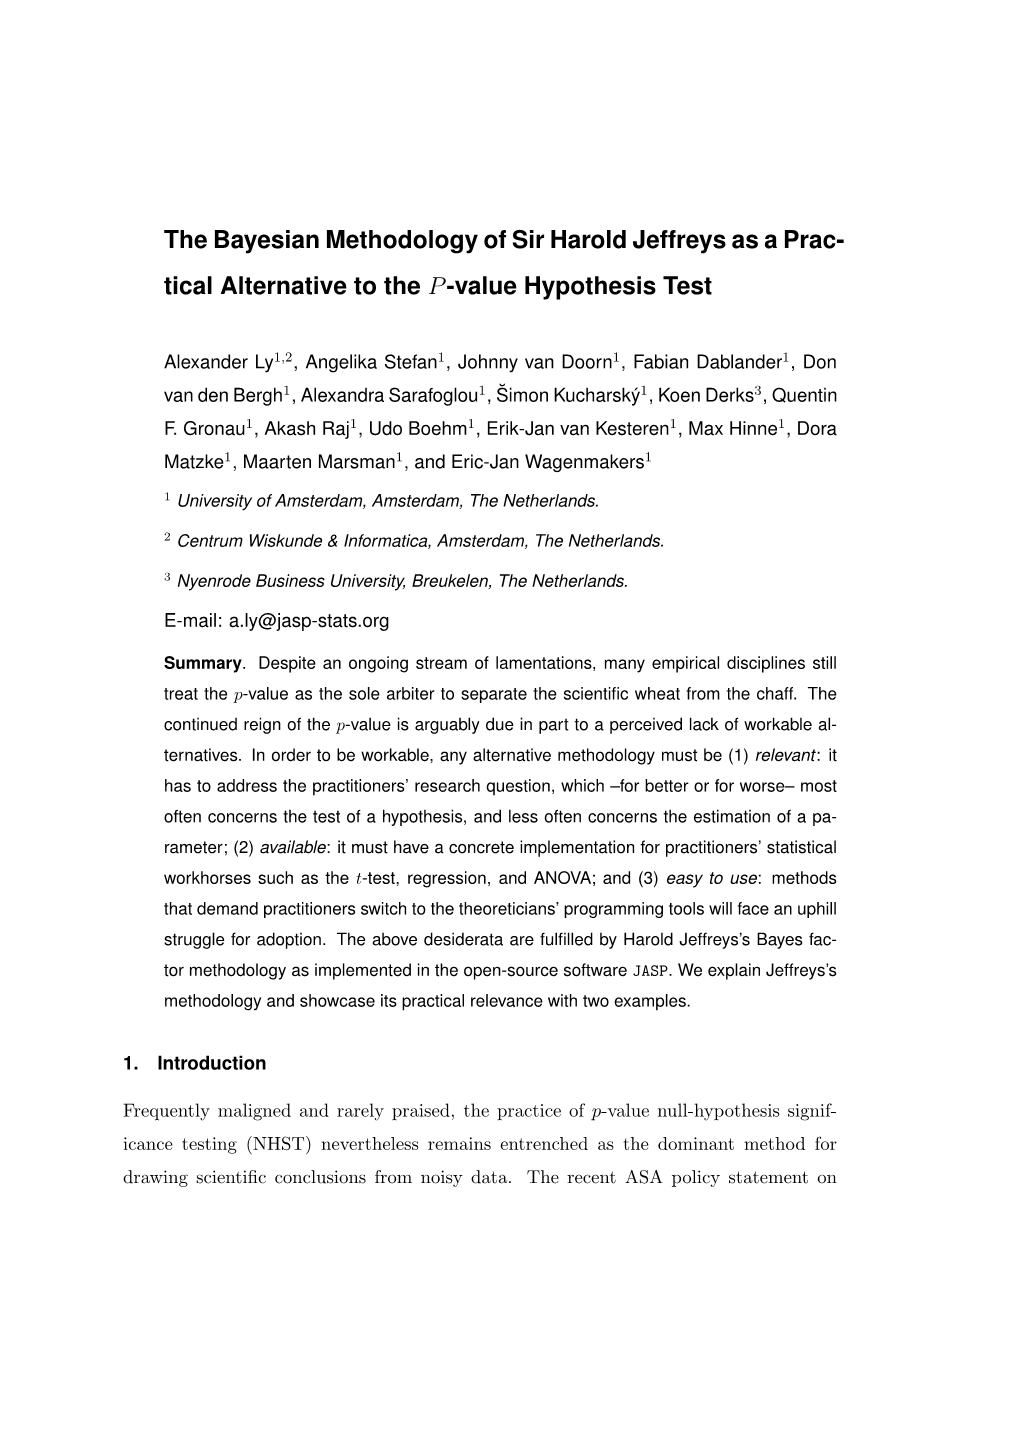 The Bayesian Methodology of Sir Harold Jeffreys As a Prac- Tical Alternative to the P -Value Hypothesis Test